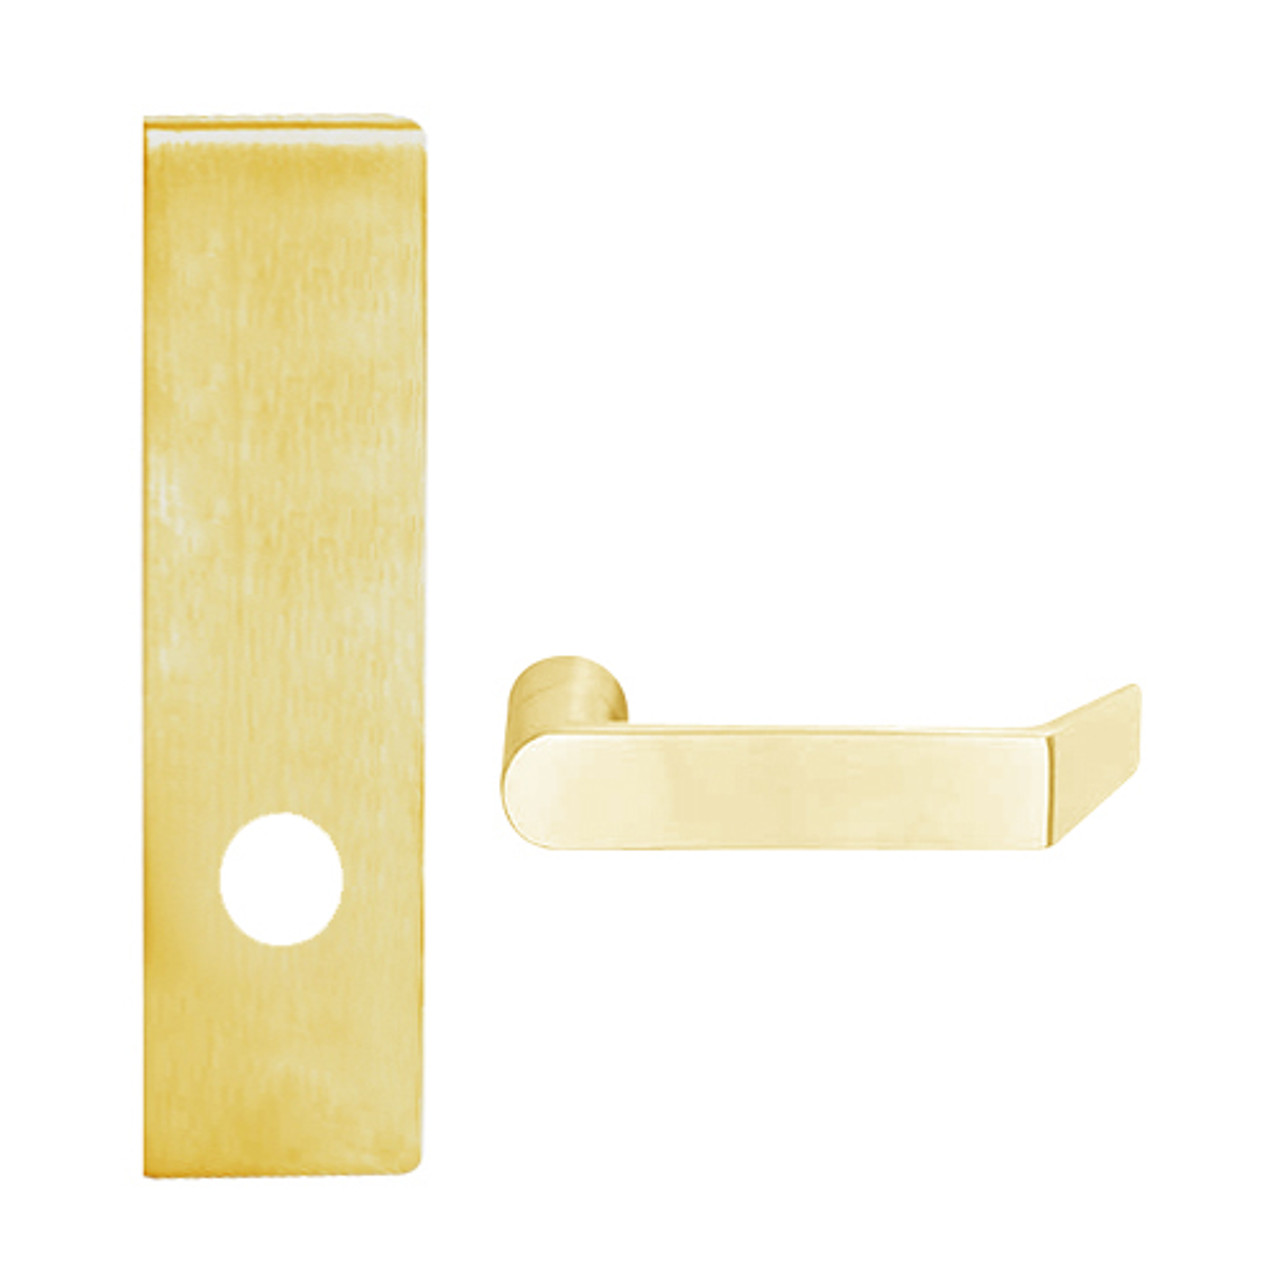 L0170-06N-605 Schlage L Series Single Dummy Trim Commercial Mortise Lock with 06 Cast Lever Design in Bright Brass